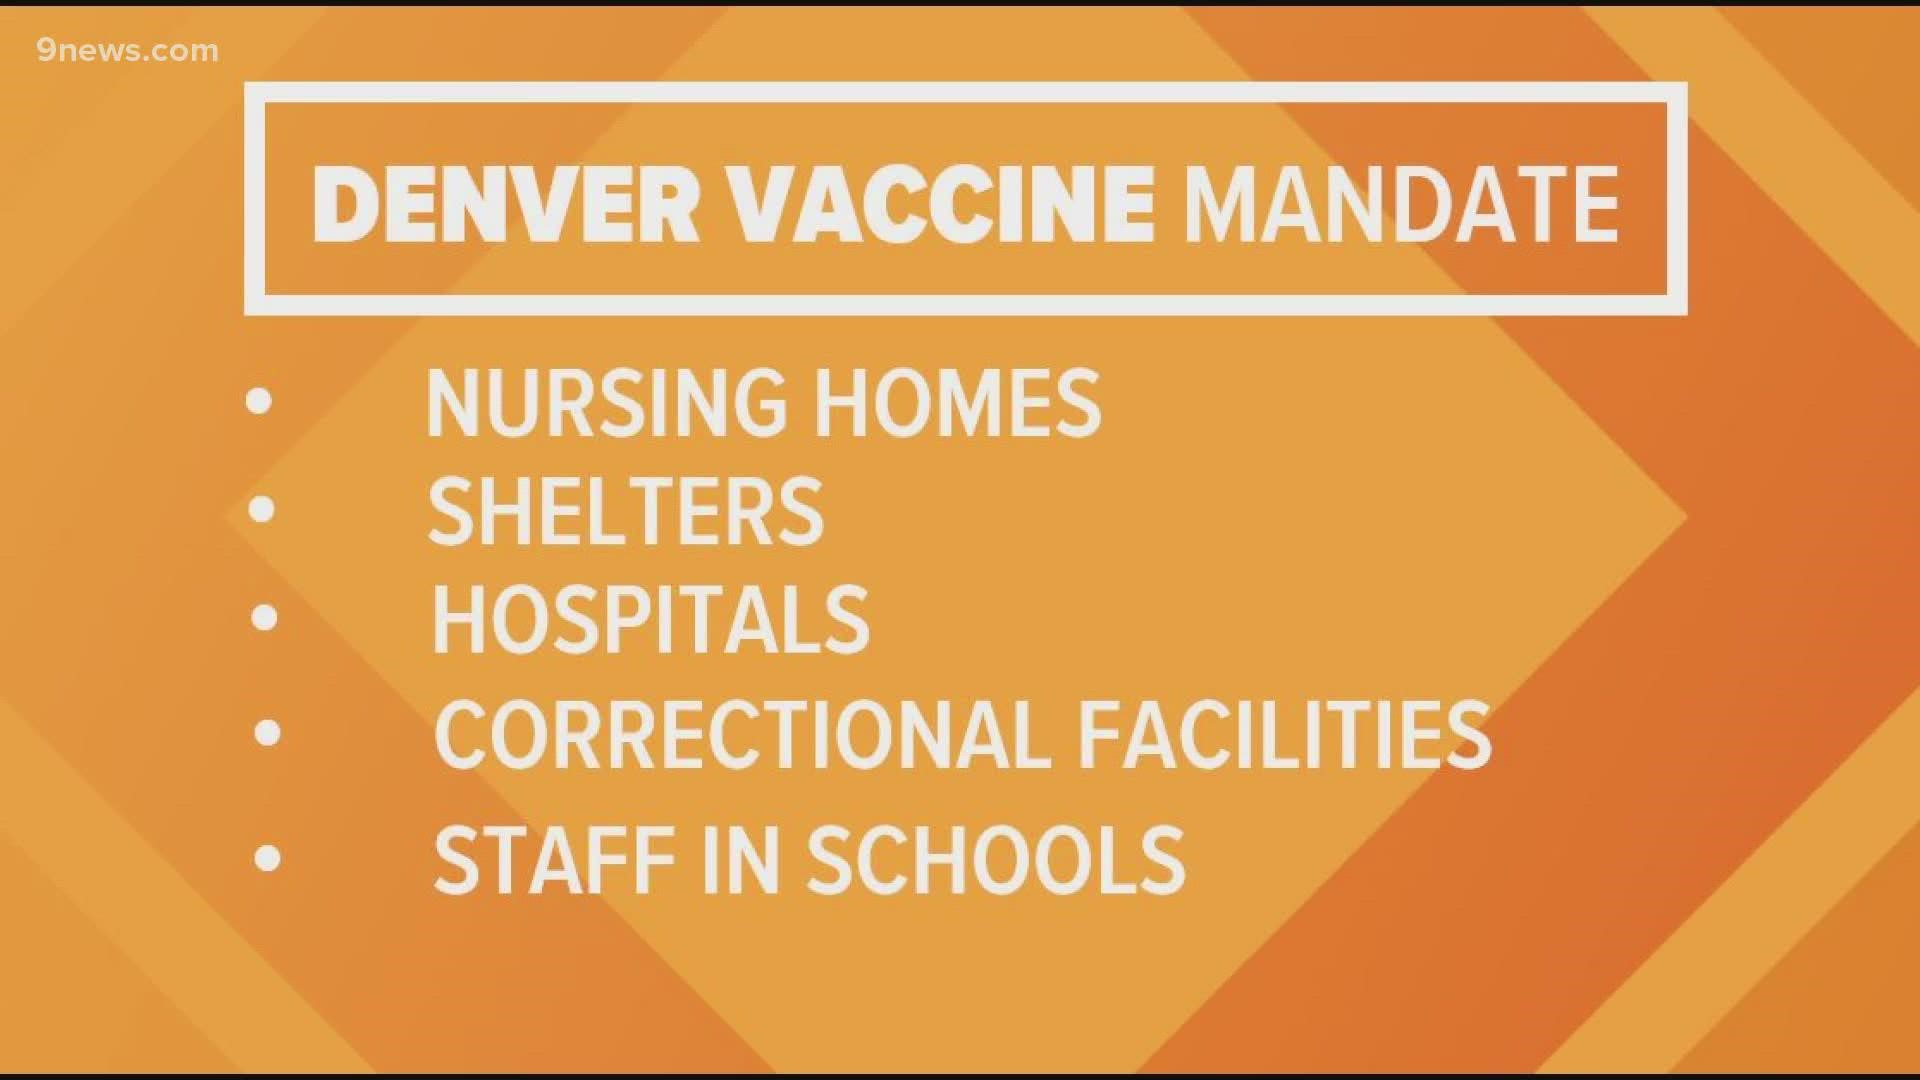 Mayor Michael Hancock says the city will mandate all city employees and private sector workers in high-risk settings be vaccinated against COVID-19 by Sept. 30.